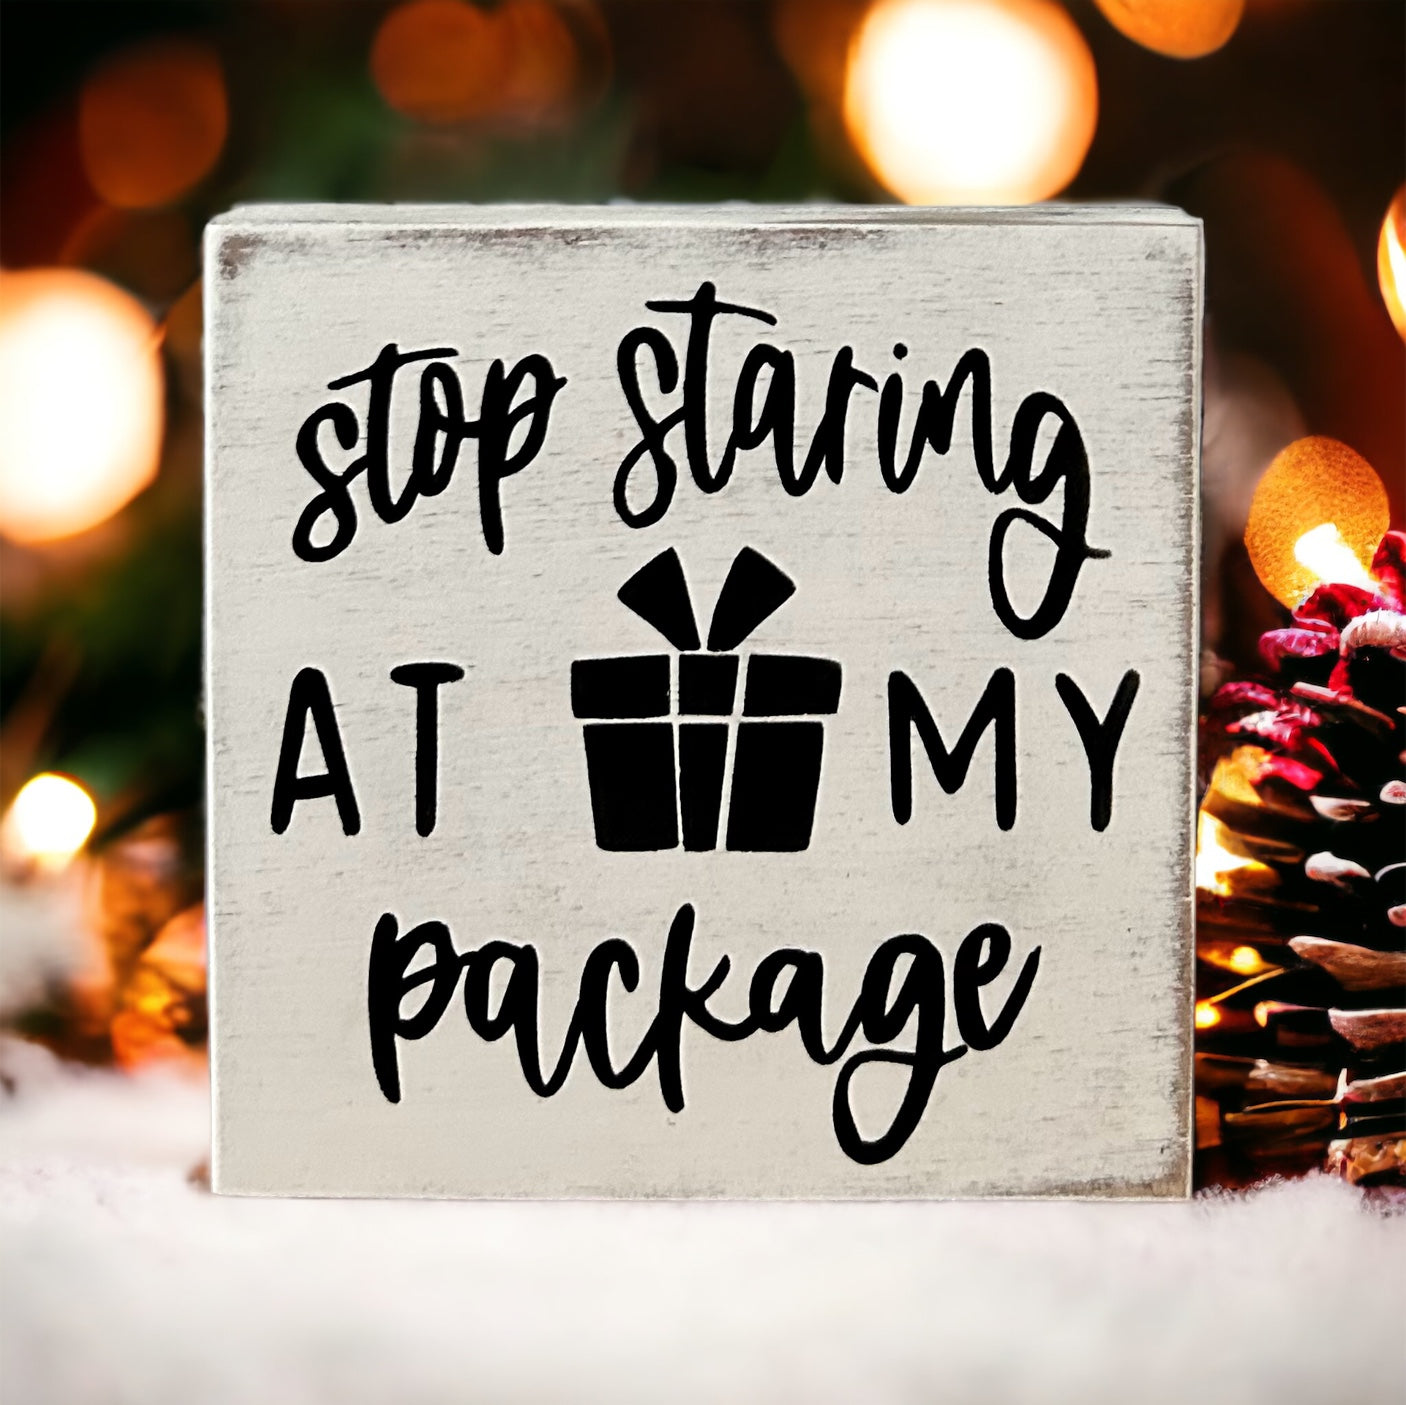 "staring at my package" wood sign